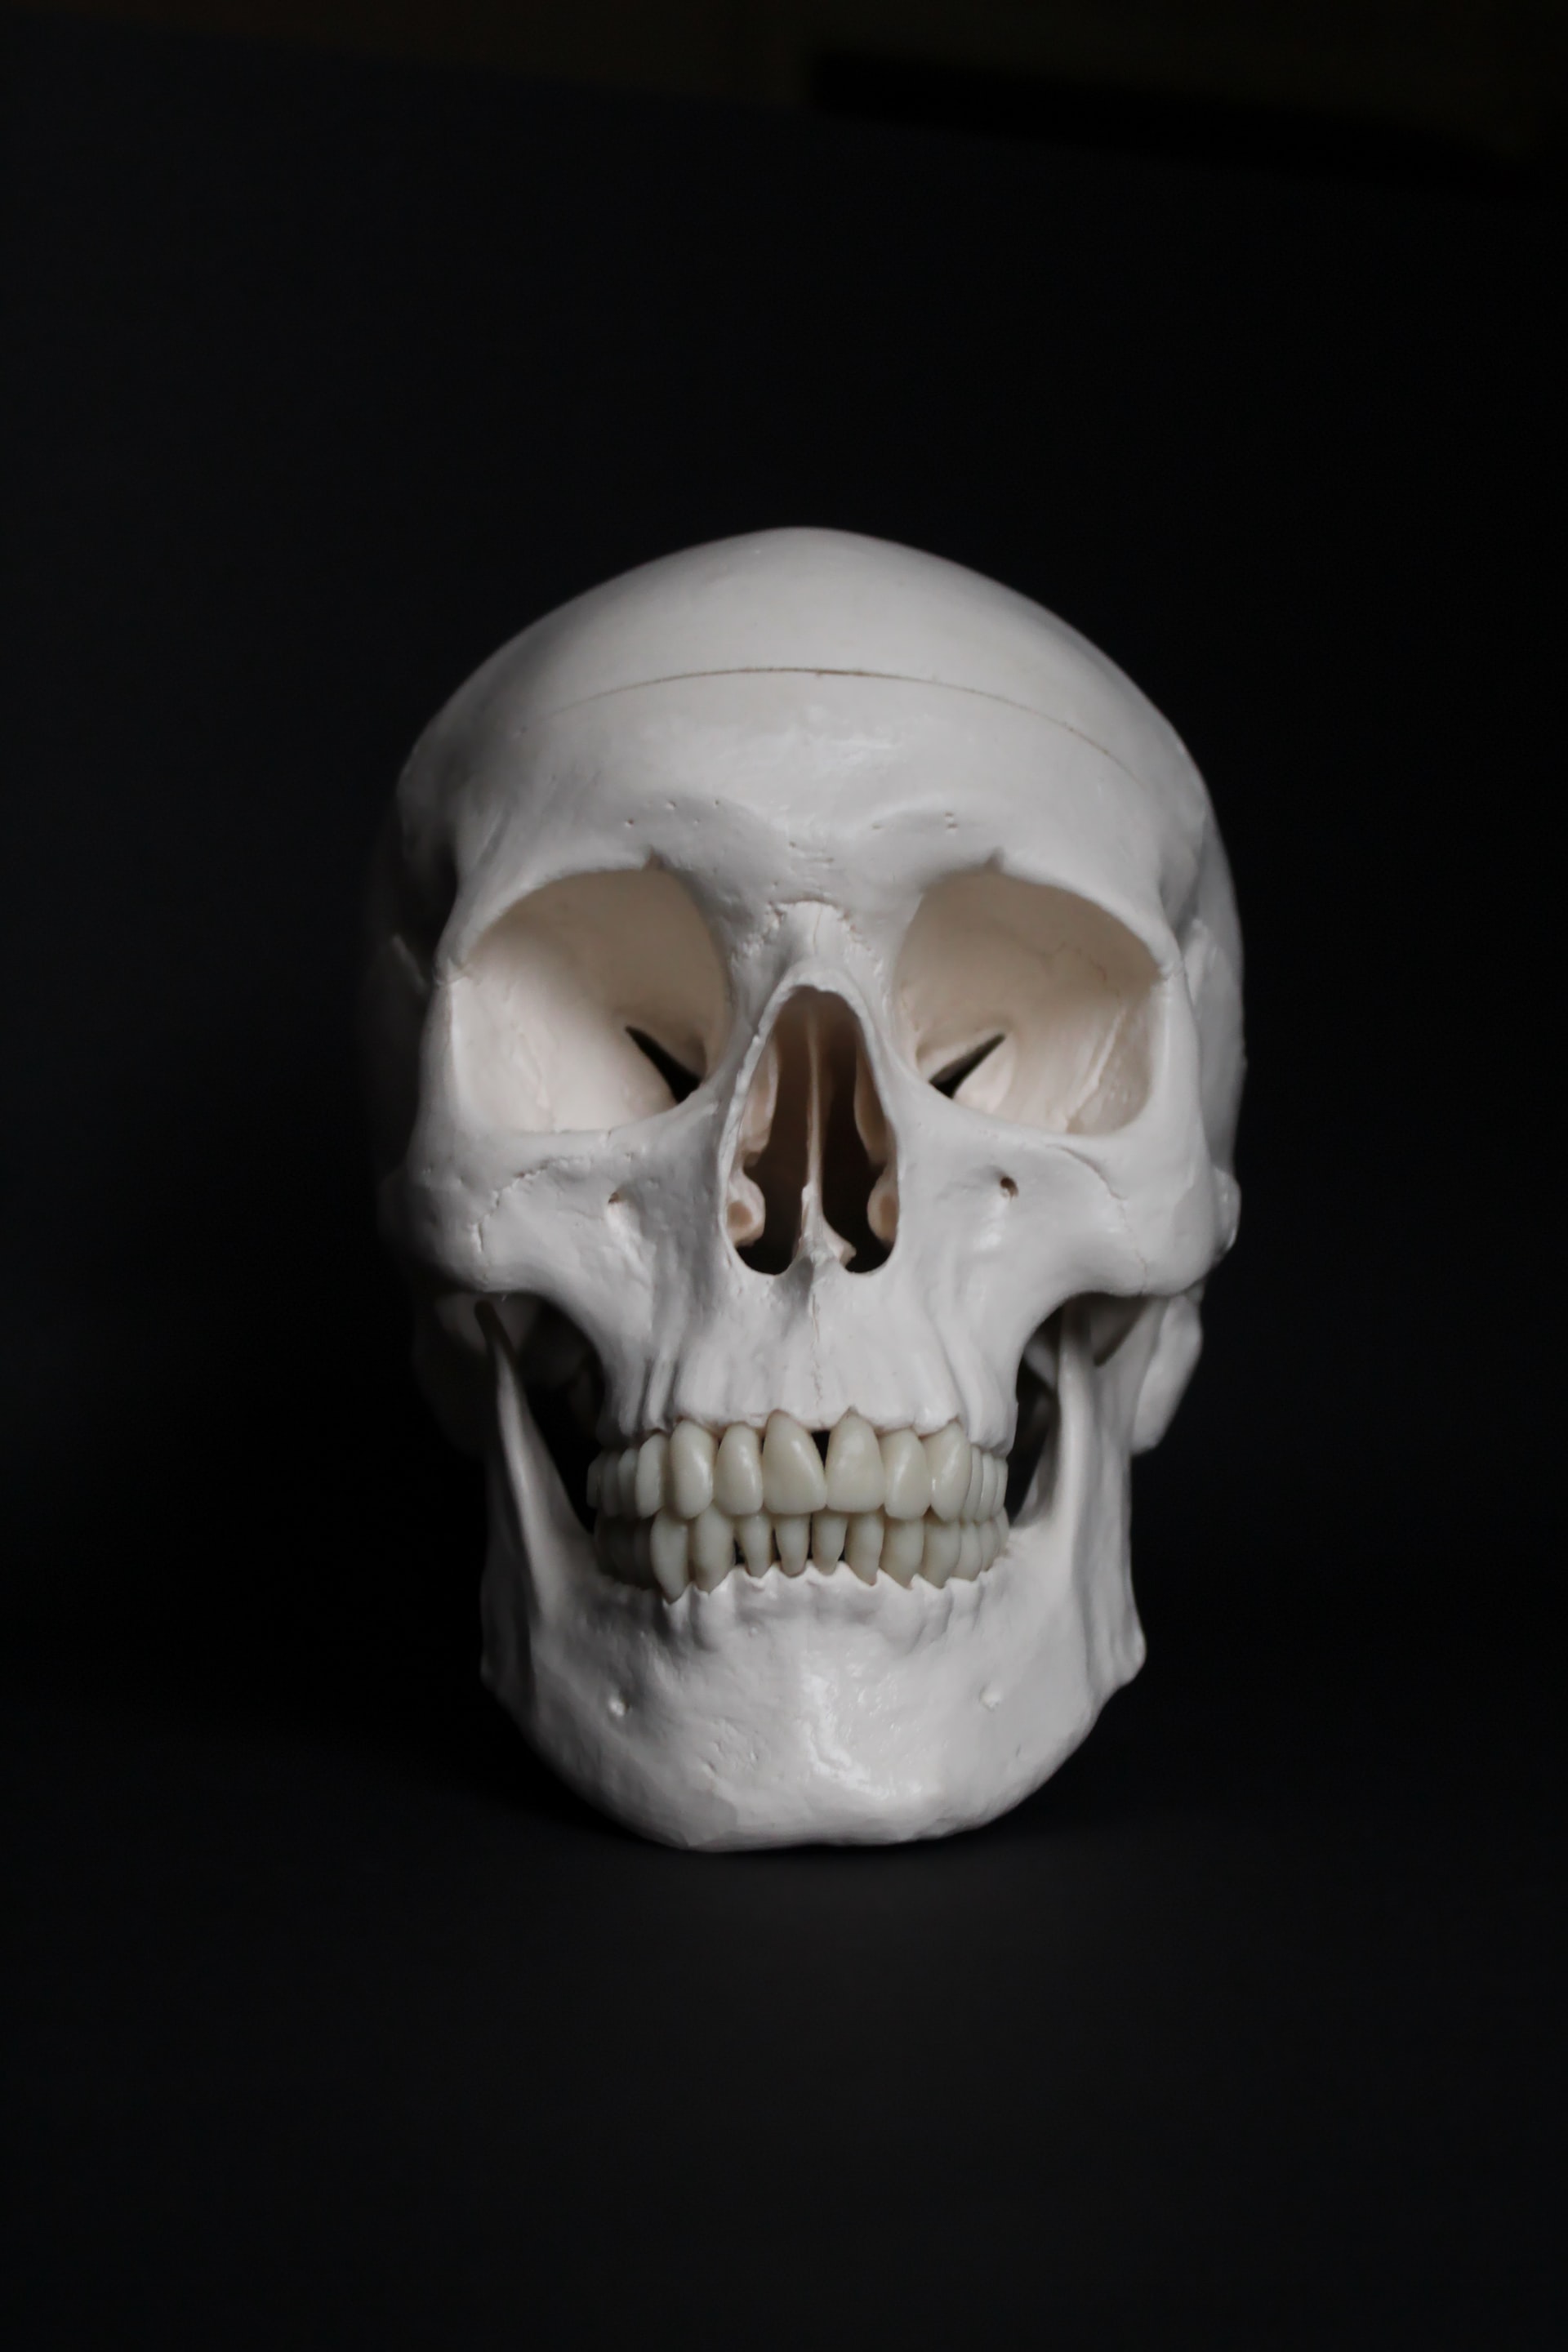 Human skull with teeth in white color